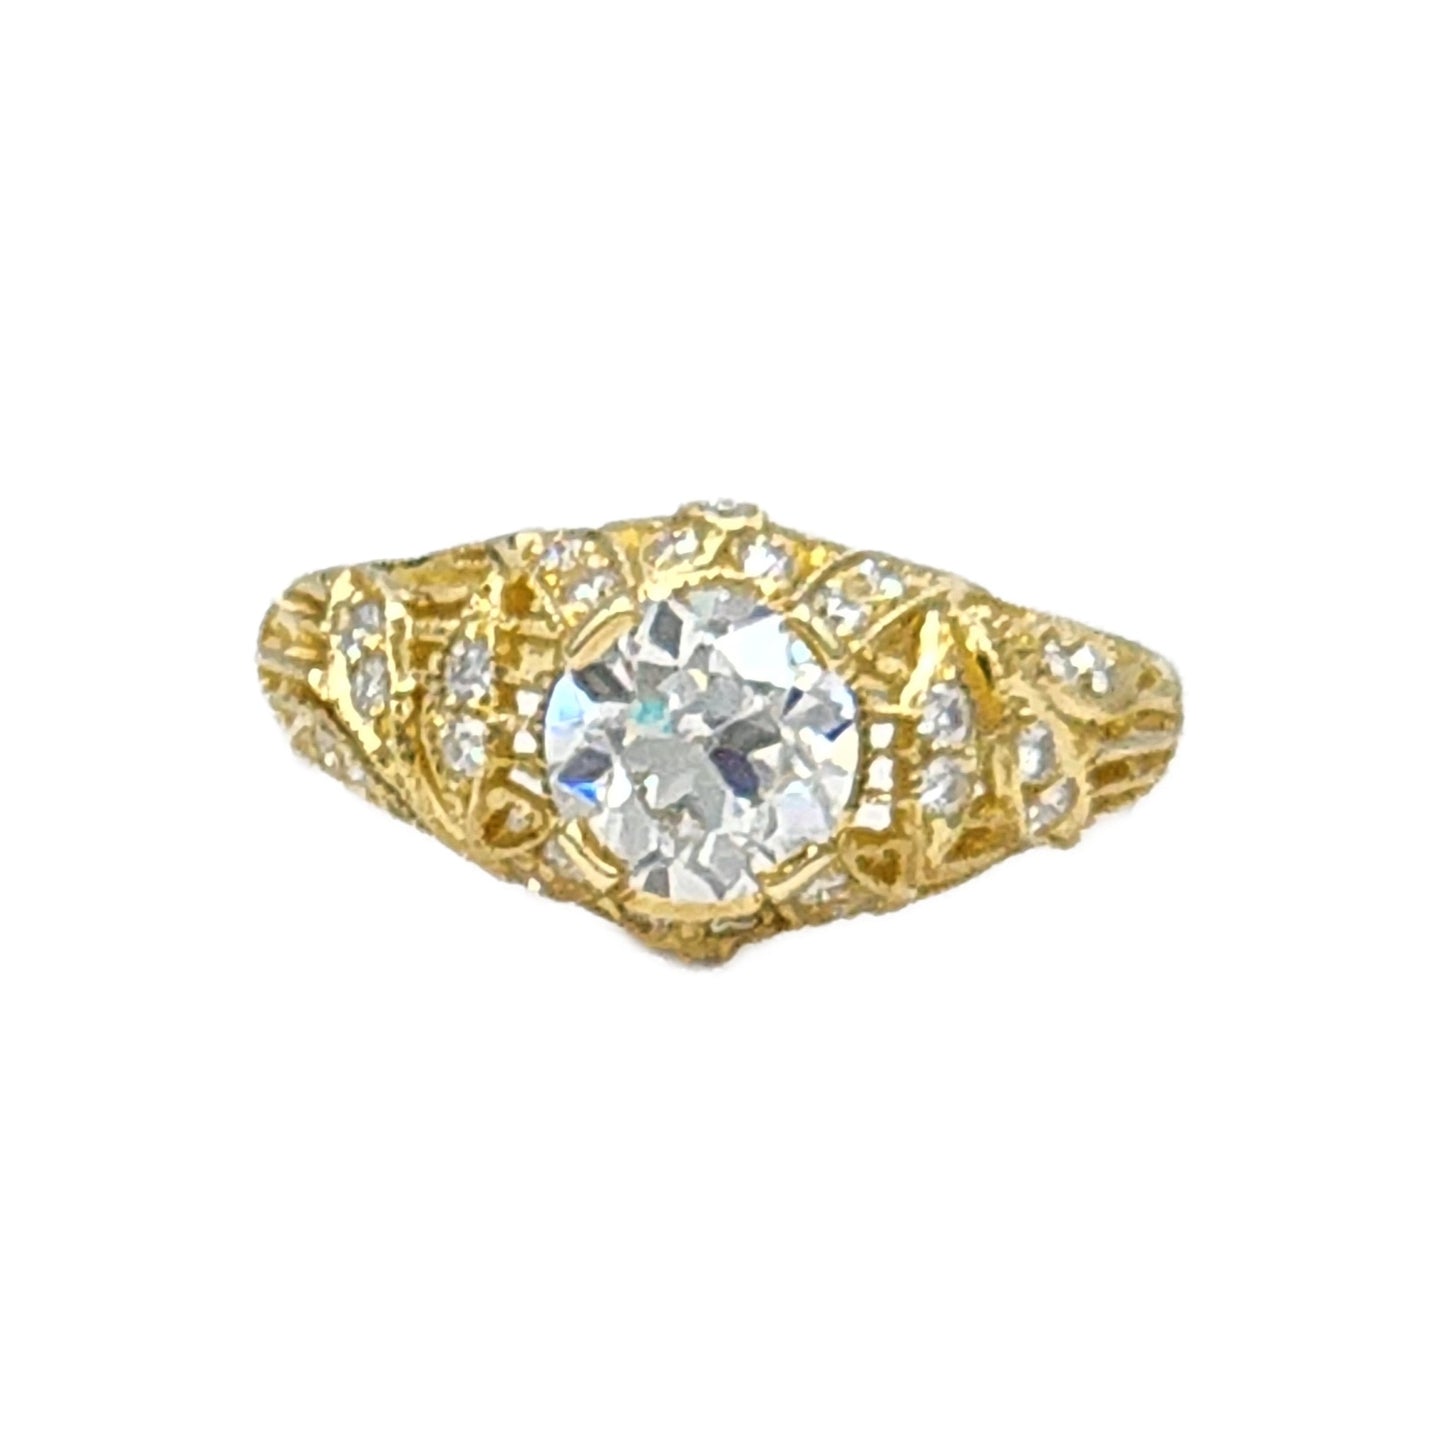 1.20 Carat J/SI2 European Cut Diamond in 18K Yellow Gold by Whitehouse Brothers, GIA Report